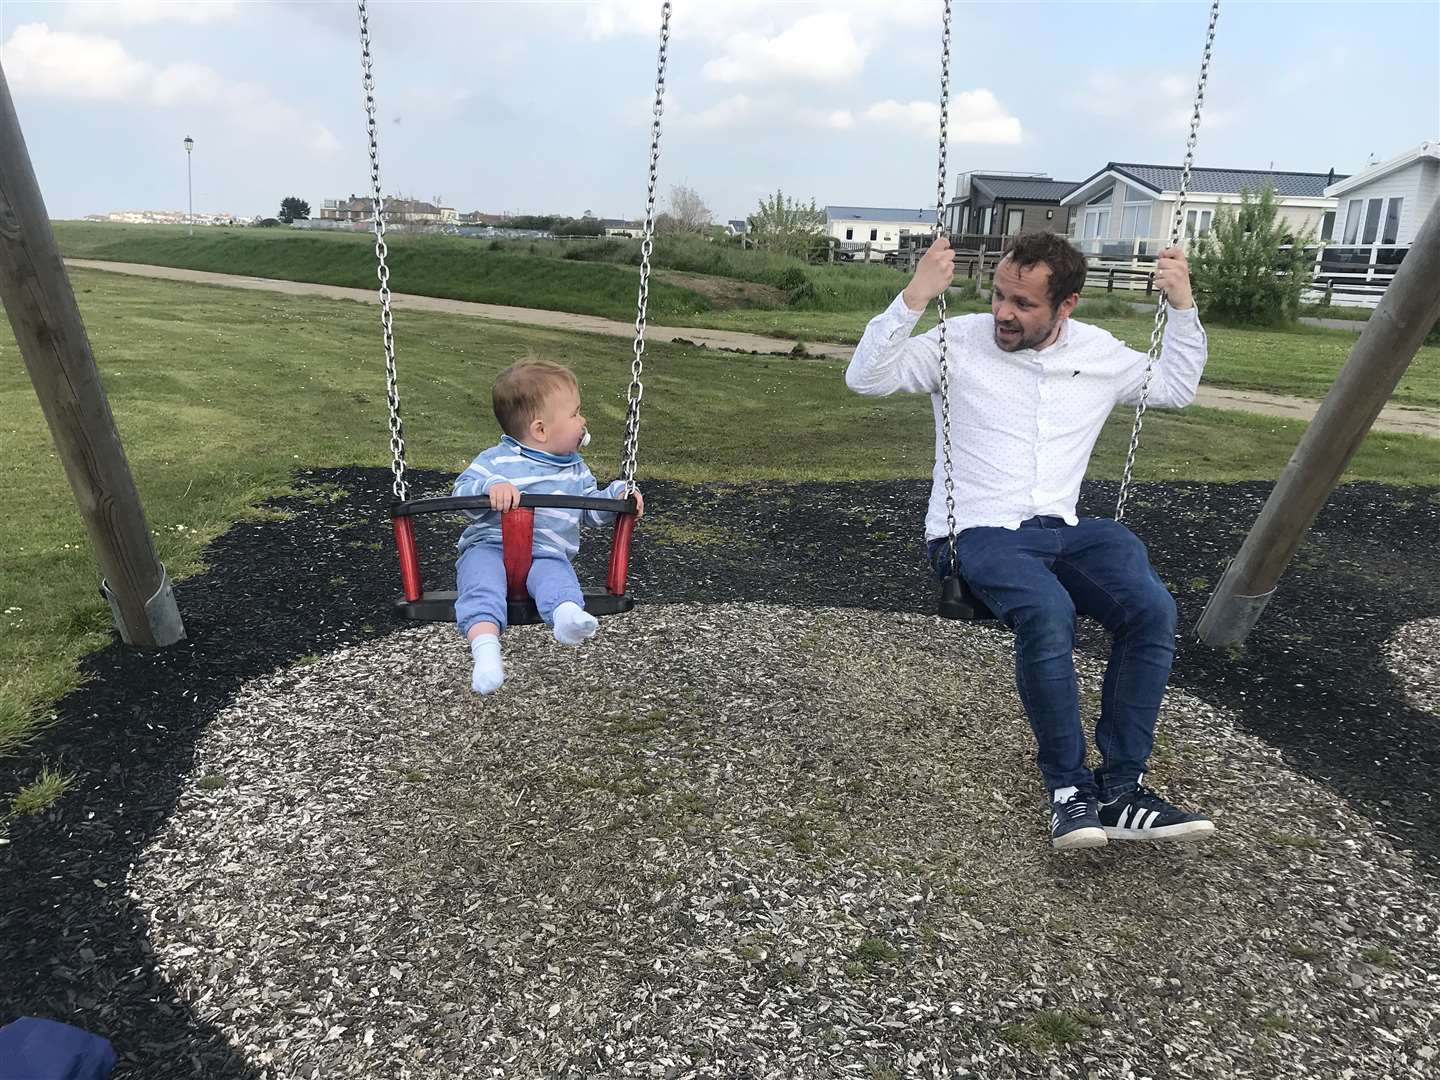 Enjoying some family time on the swings